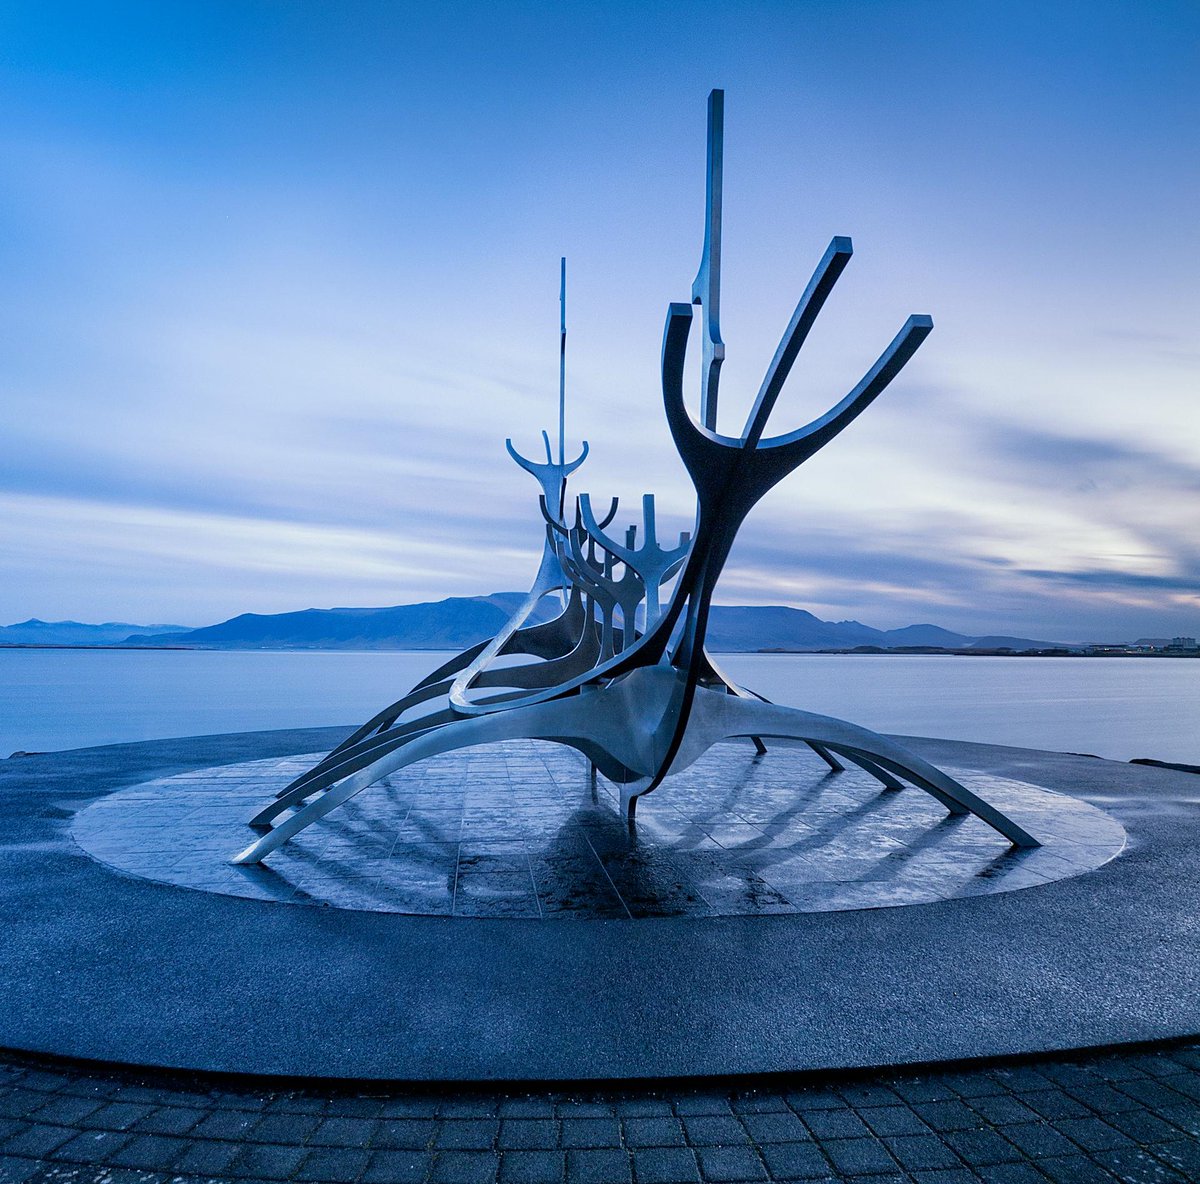 Reykjavik, Iceland is our editor's choice for #91 out of 100 destinations to visit. Read here to find out why medium.com/@CryptoTravelD…
Let us know if you agree 👇in the comments
And for #traveldeals on rooms in #Reykjavik 👉 cryptotraveldeals.com 
Powered by @XPRNetwork $XPR